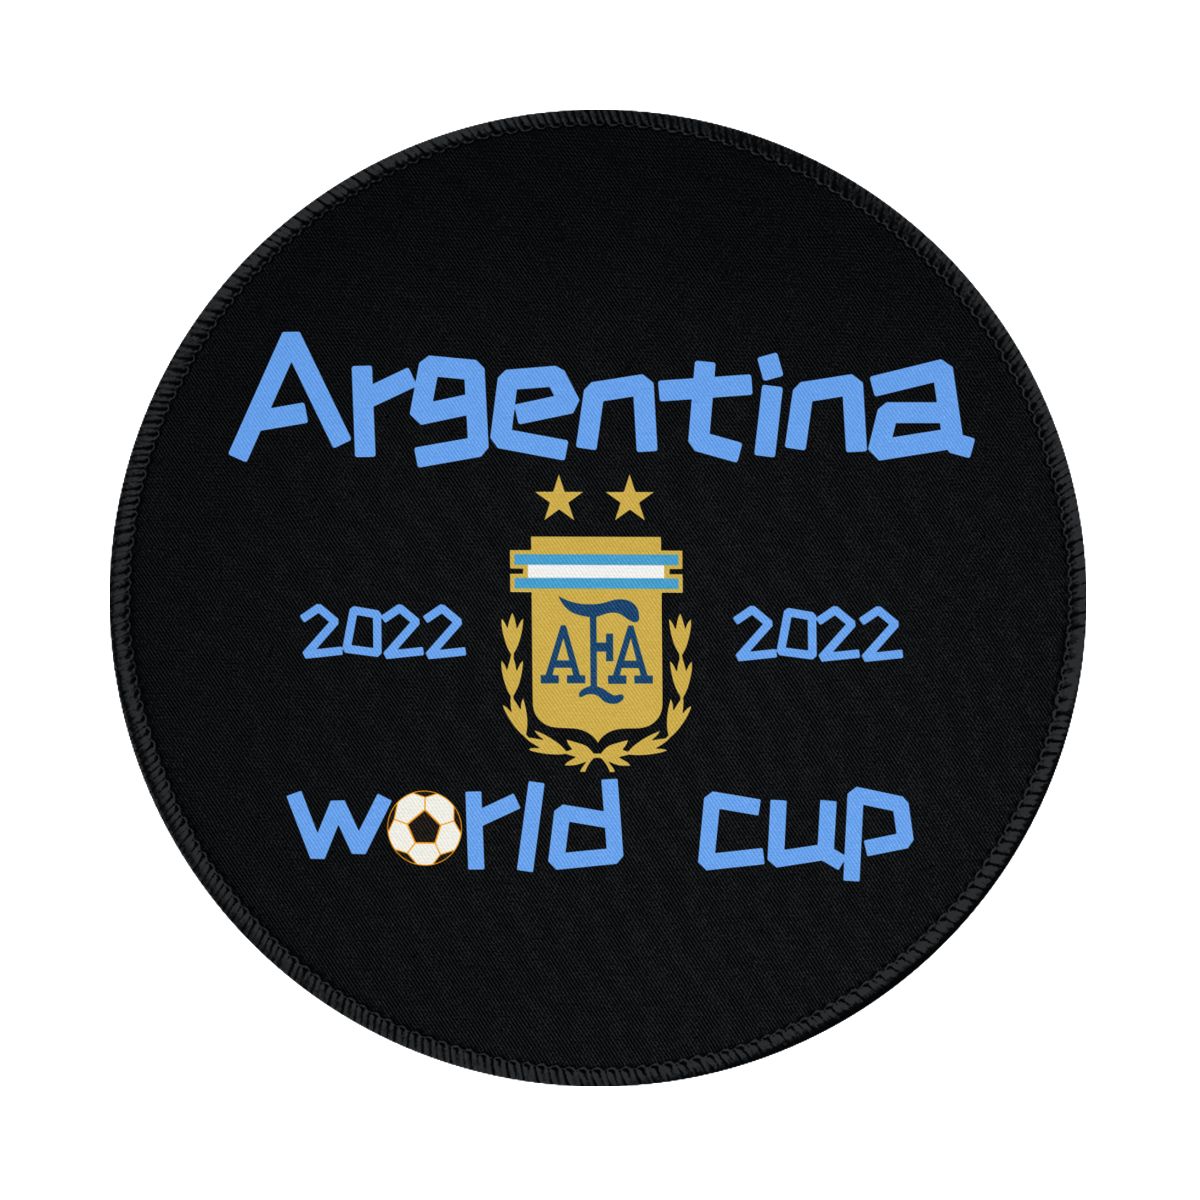 Argentina 2022 World Cup Team Logo Non-Slip Rubber Round Mouse Pad